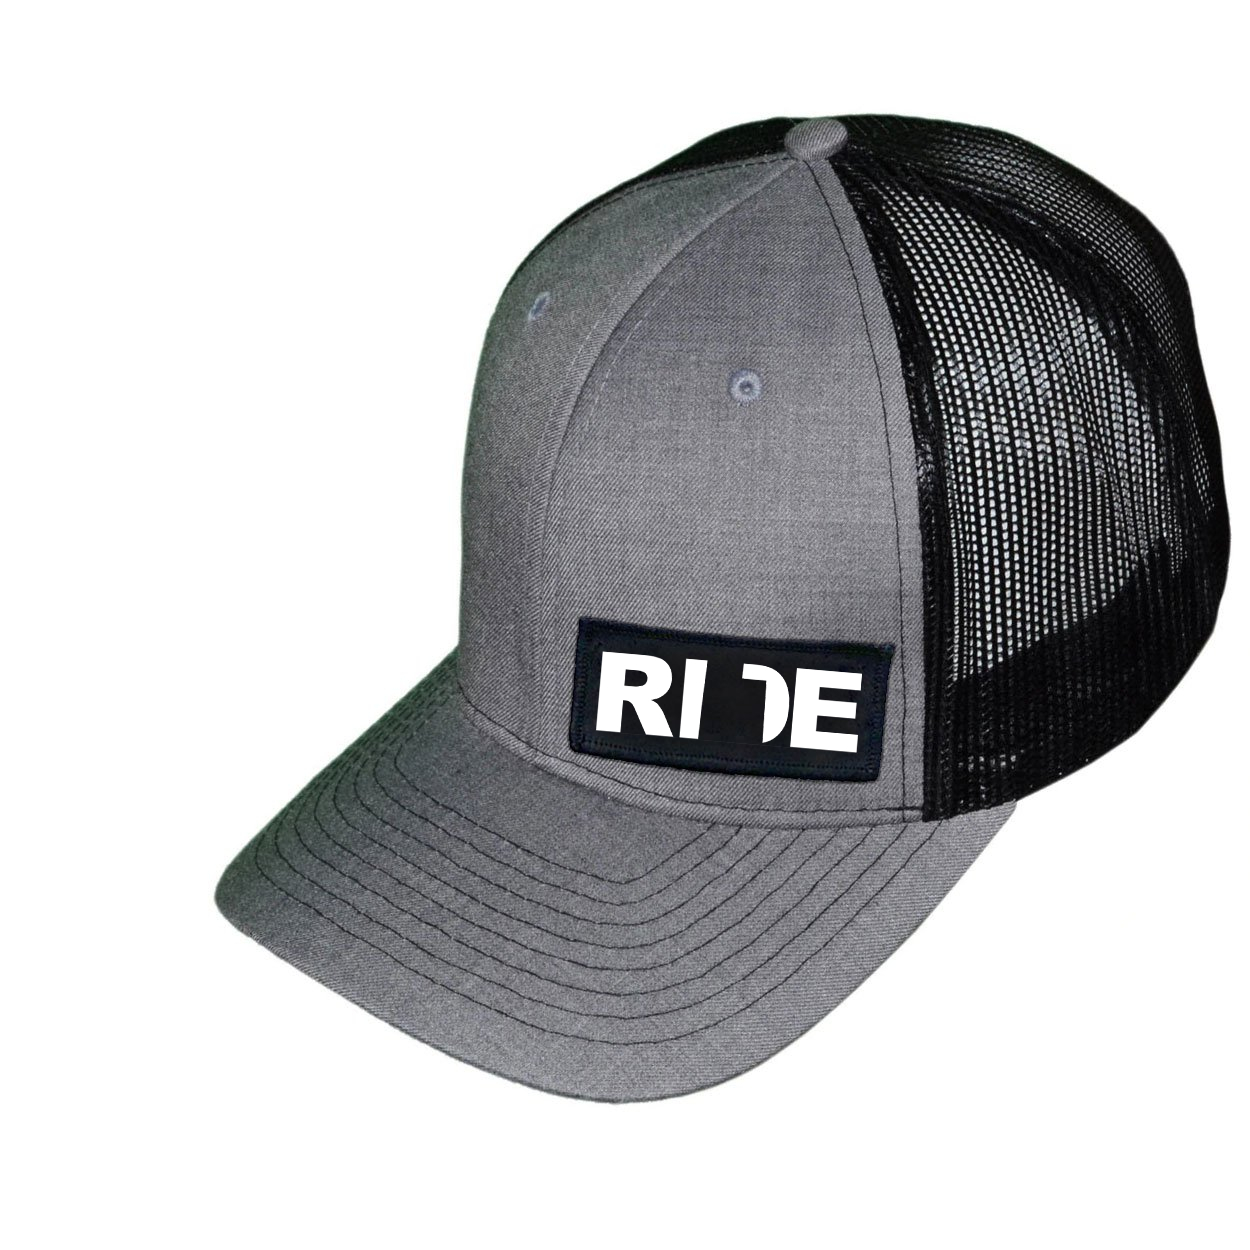 Ride Utah Night Out Embroidered Snapback Trucker Hat Heather Gray/Black